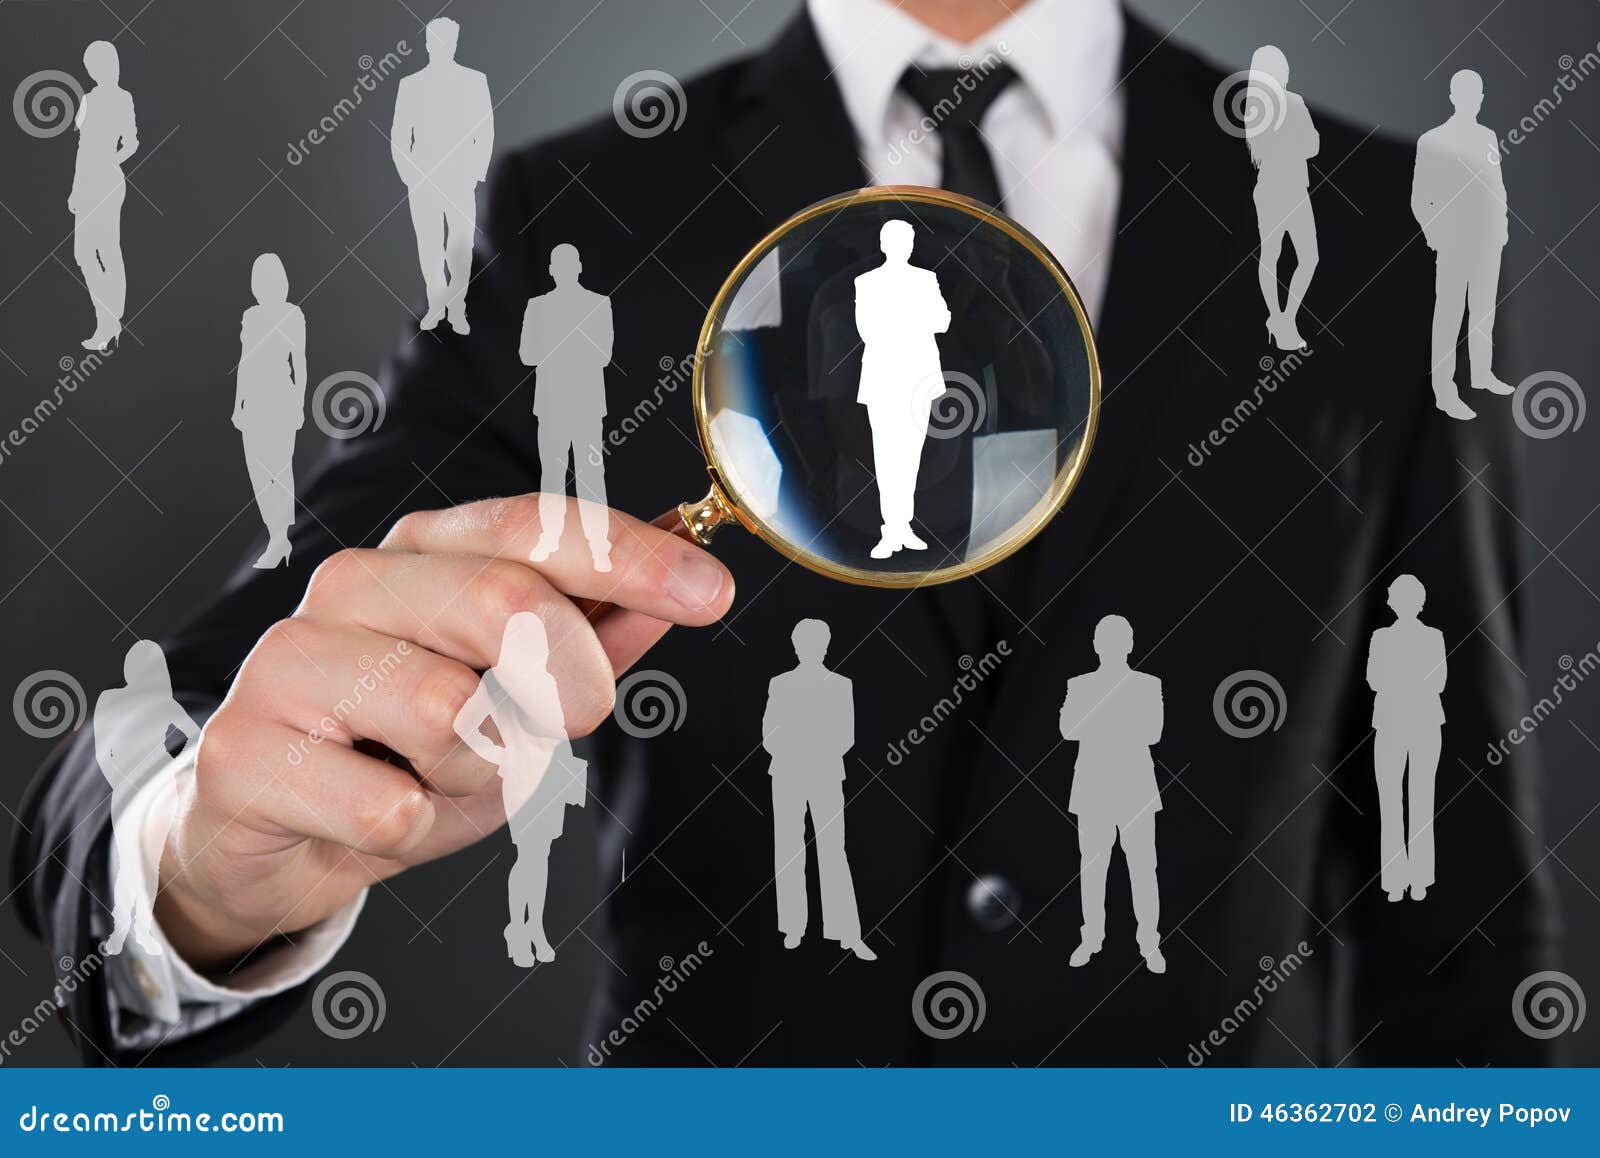 businessman searching candidate with magnifier